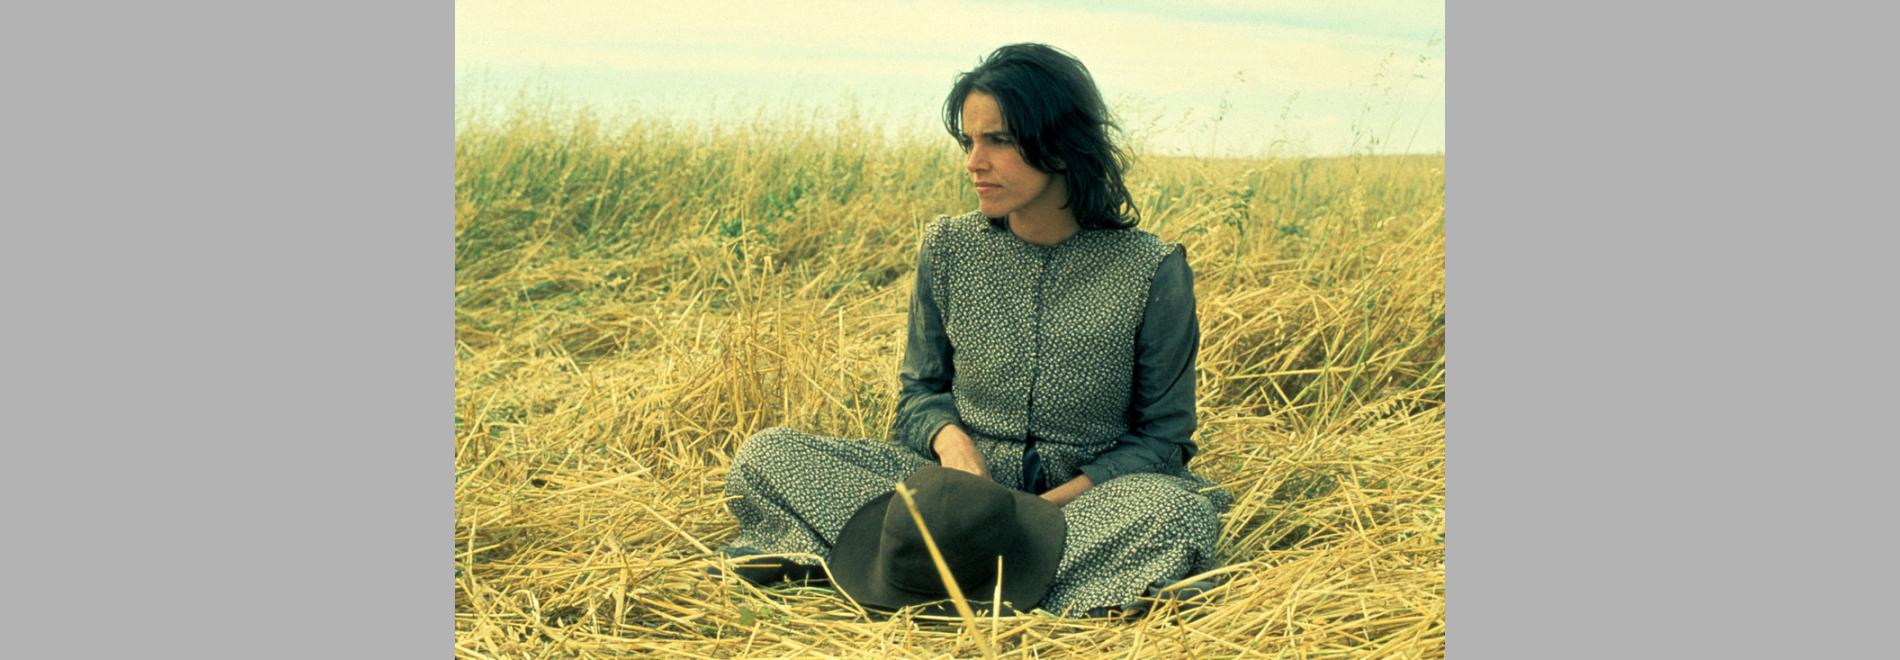 Days of Heaven (Terrence Malick, 1978)